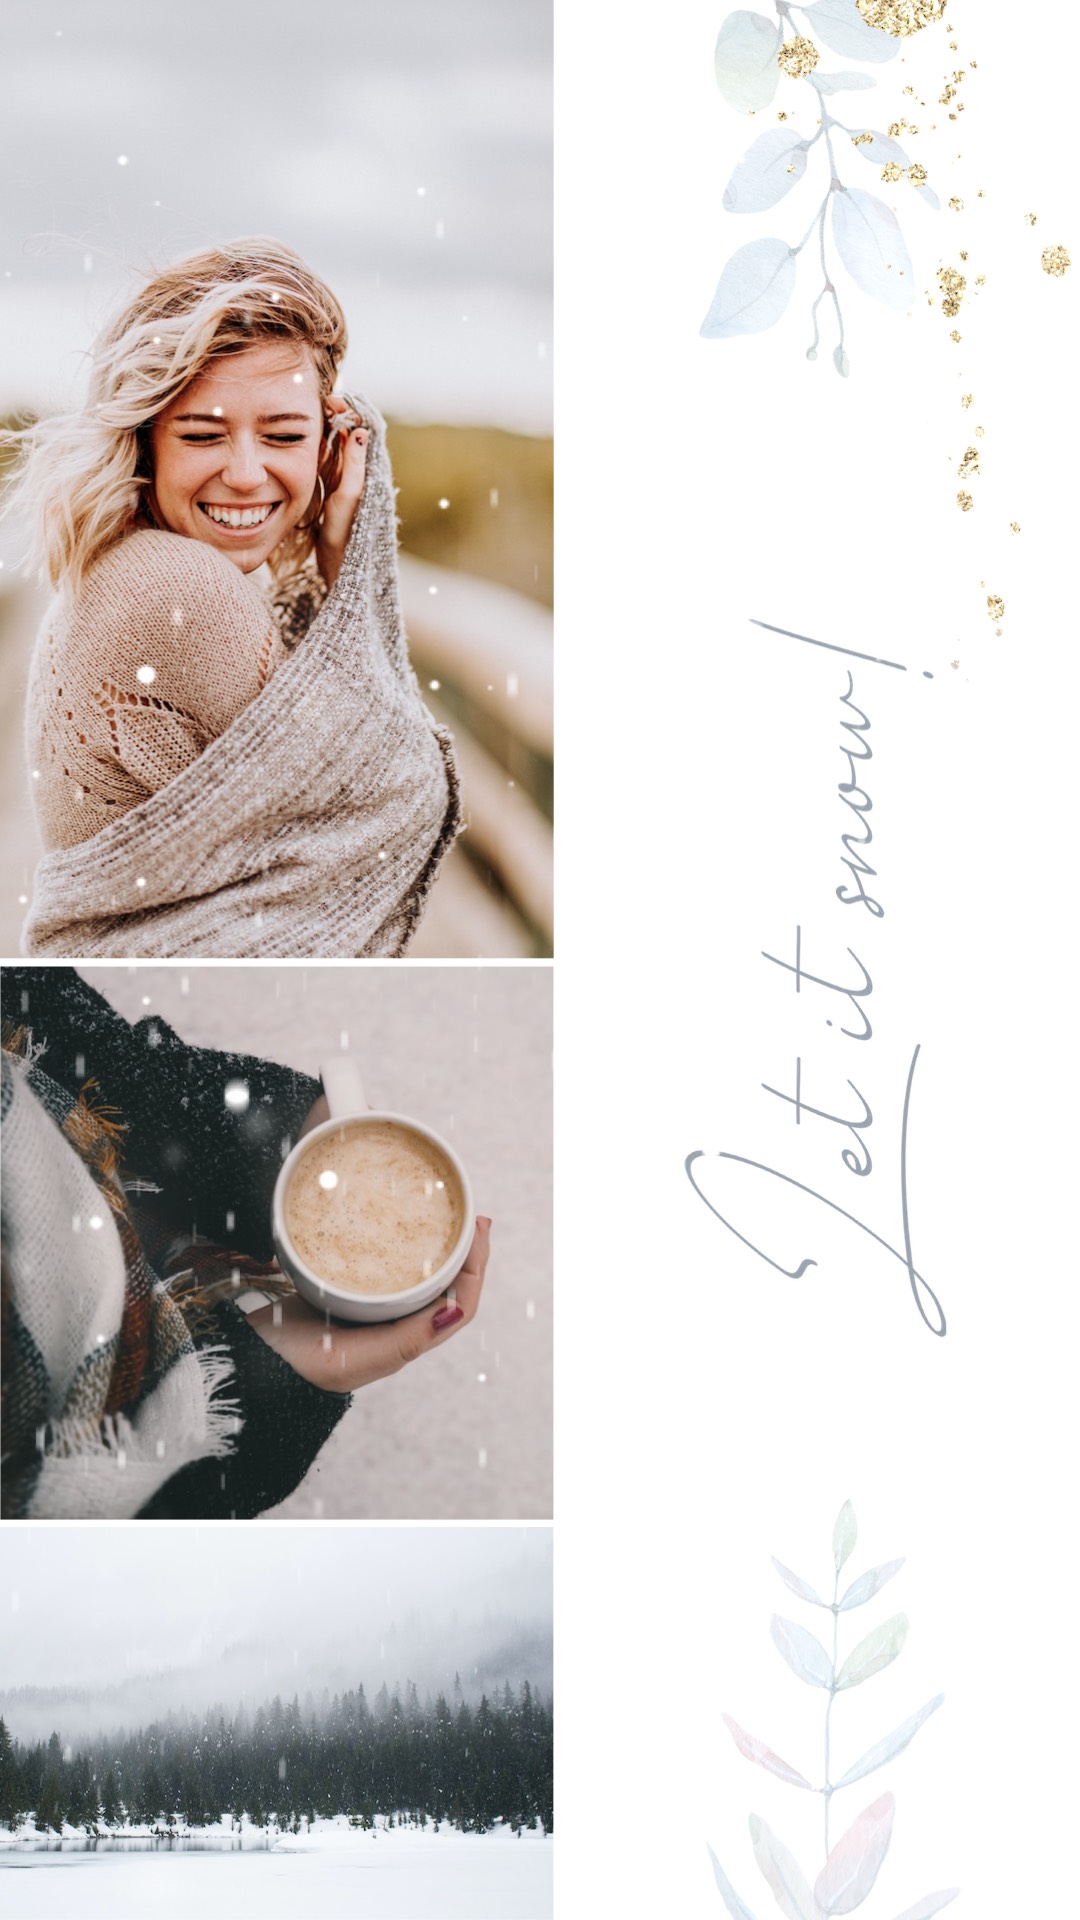 A Collage Of Photos With A Woman Holding A Cup Of Coffee Winter Story Template